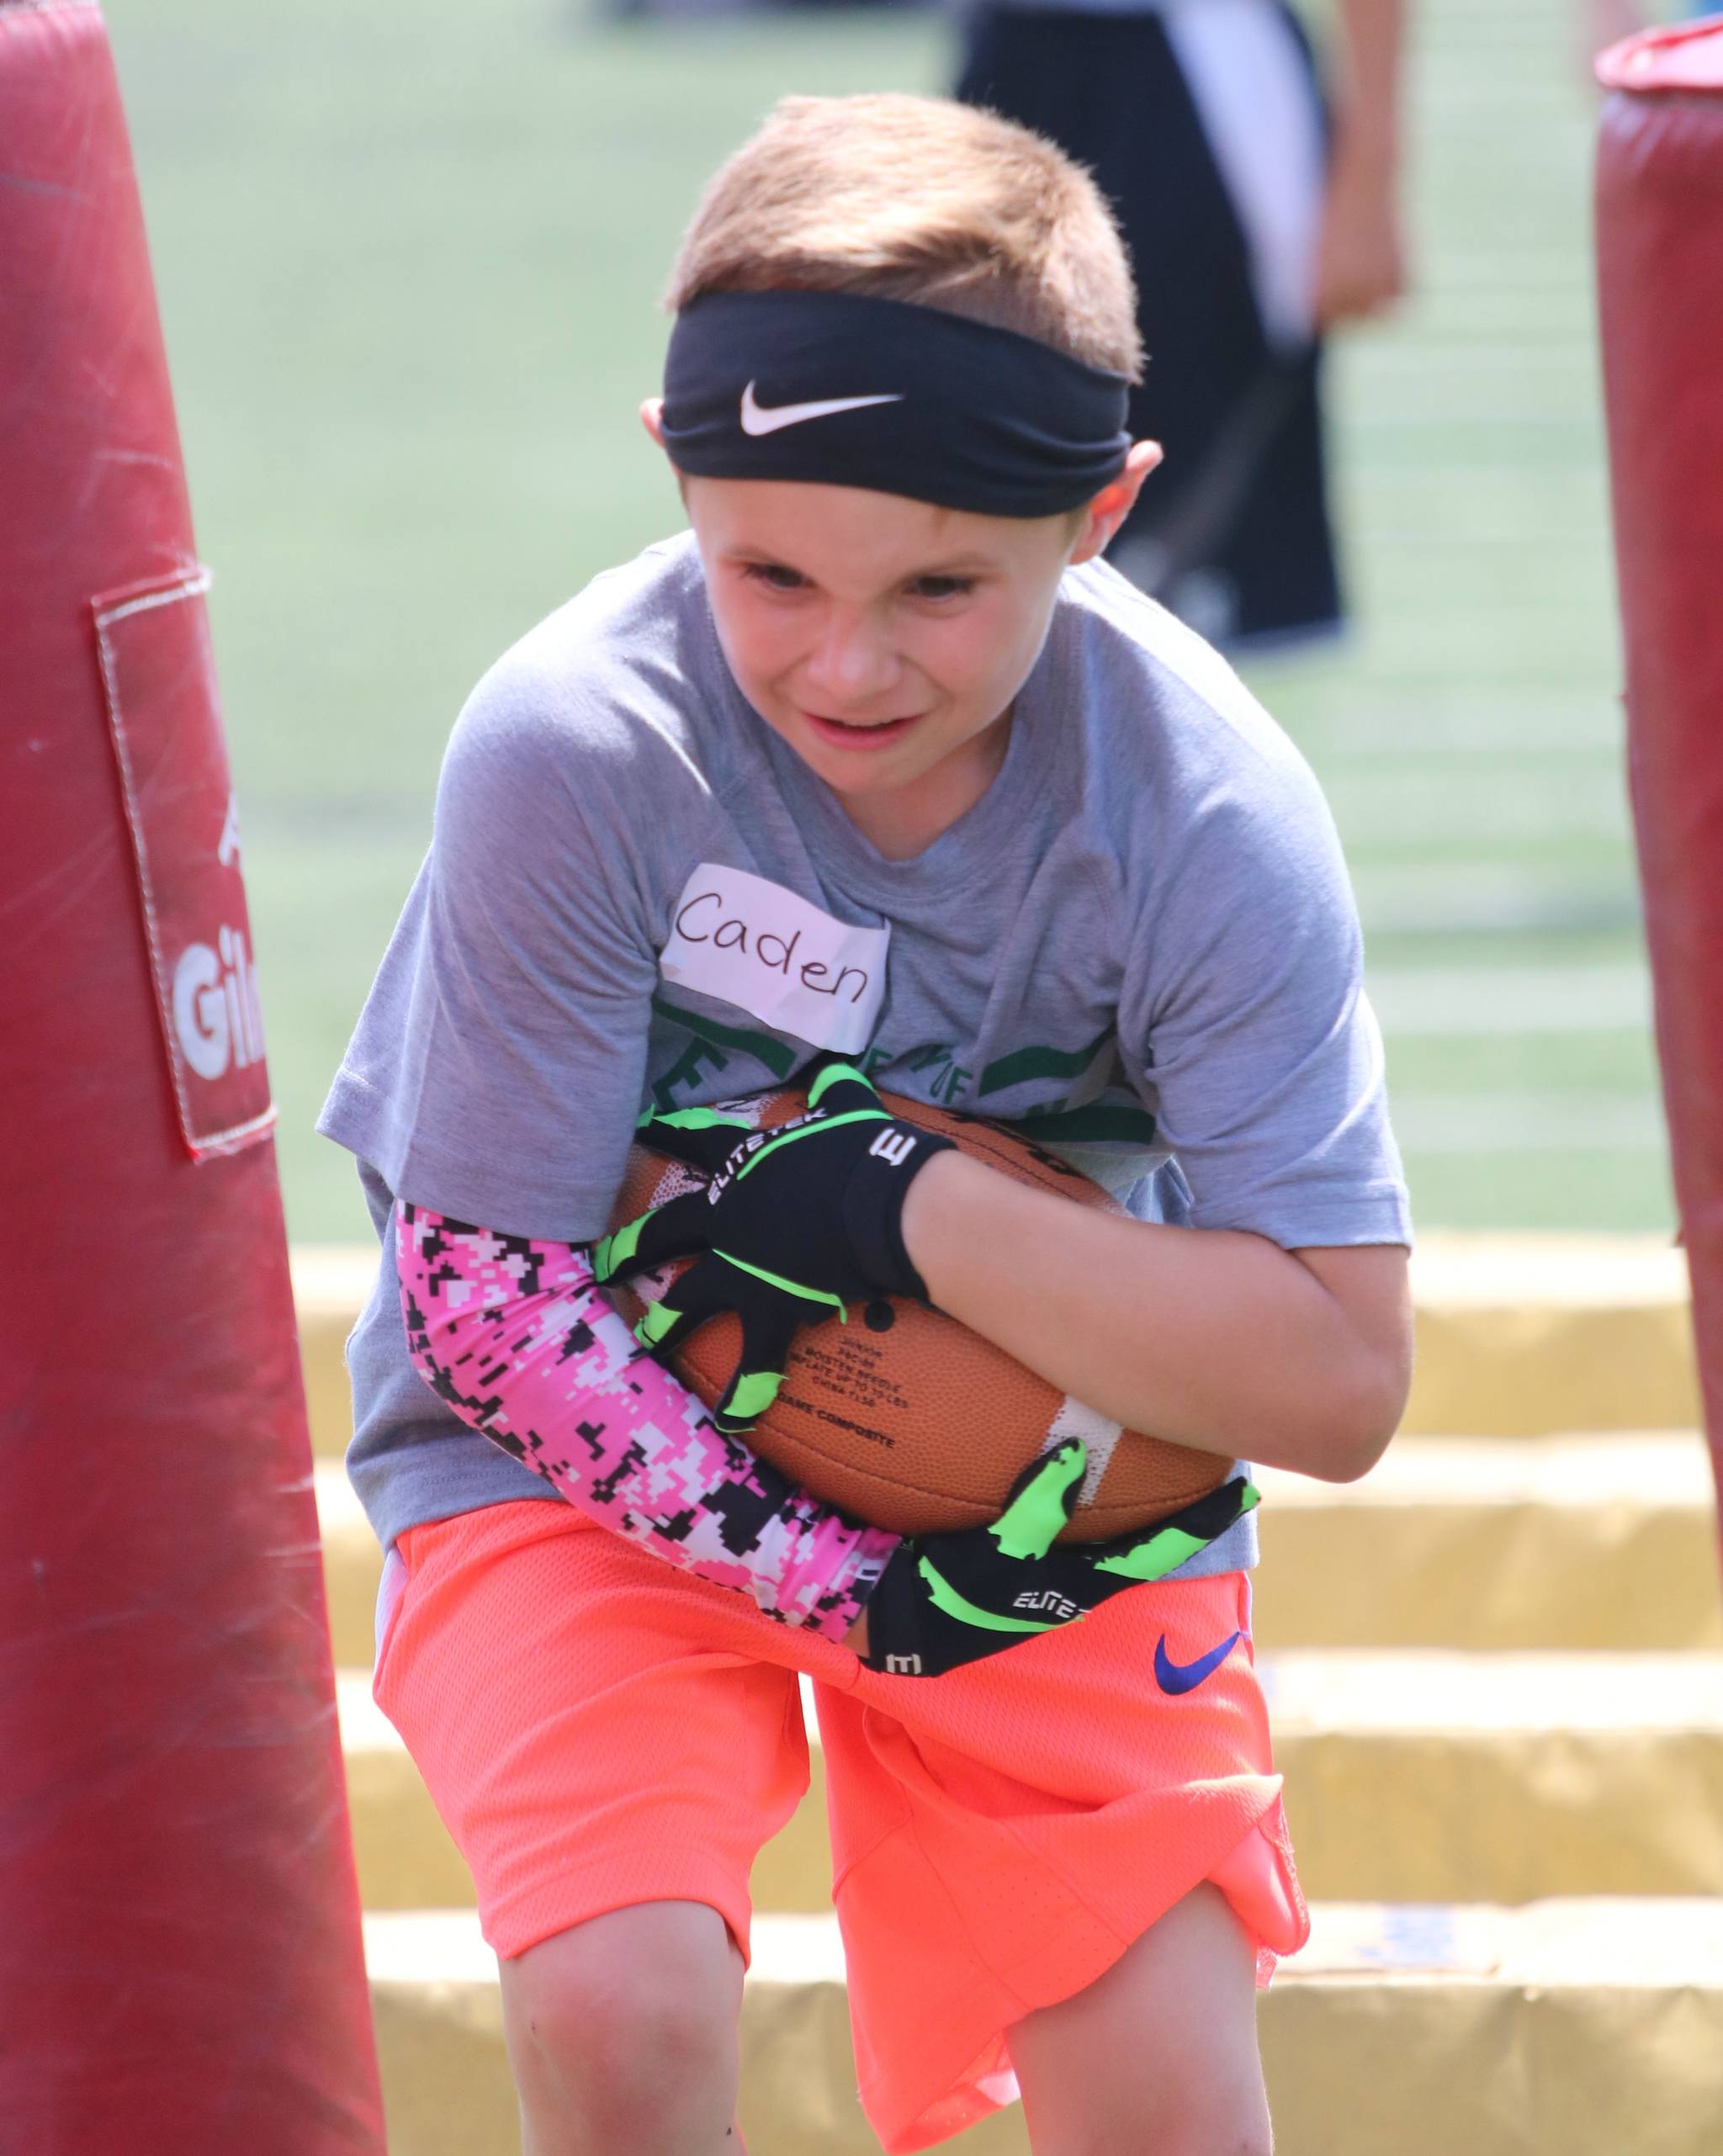 Caden Weber plows through the pads during the Redmond Junior Mustang Football Camp on June 26. Andy Nystrom / staff photo